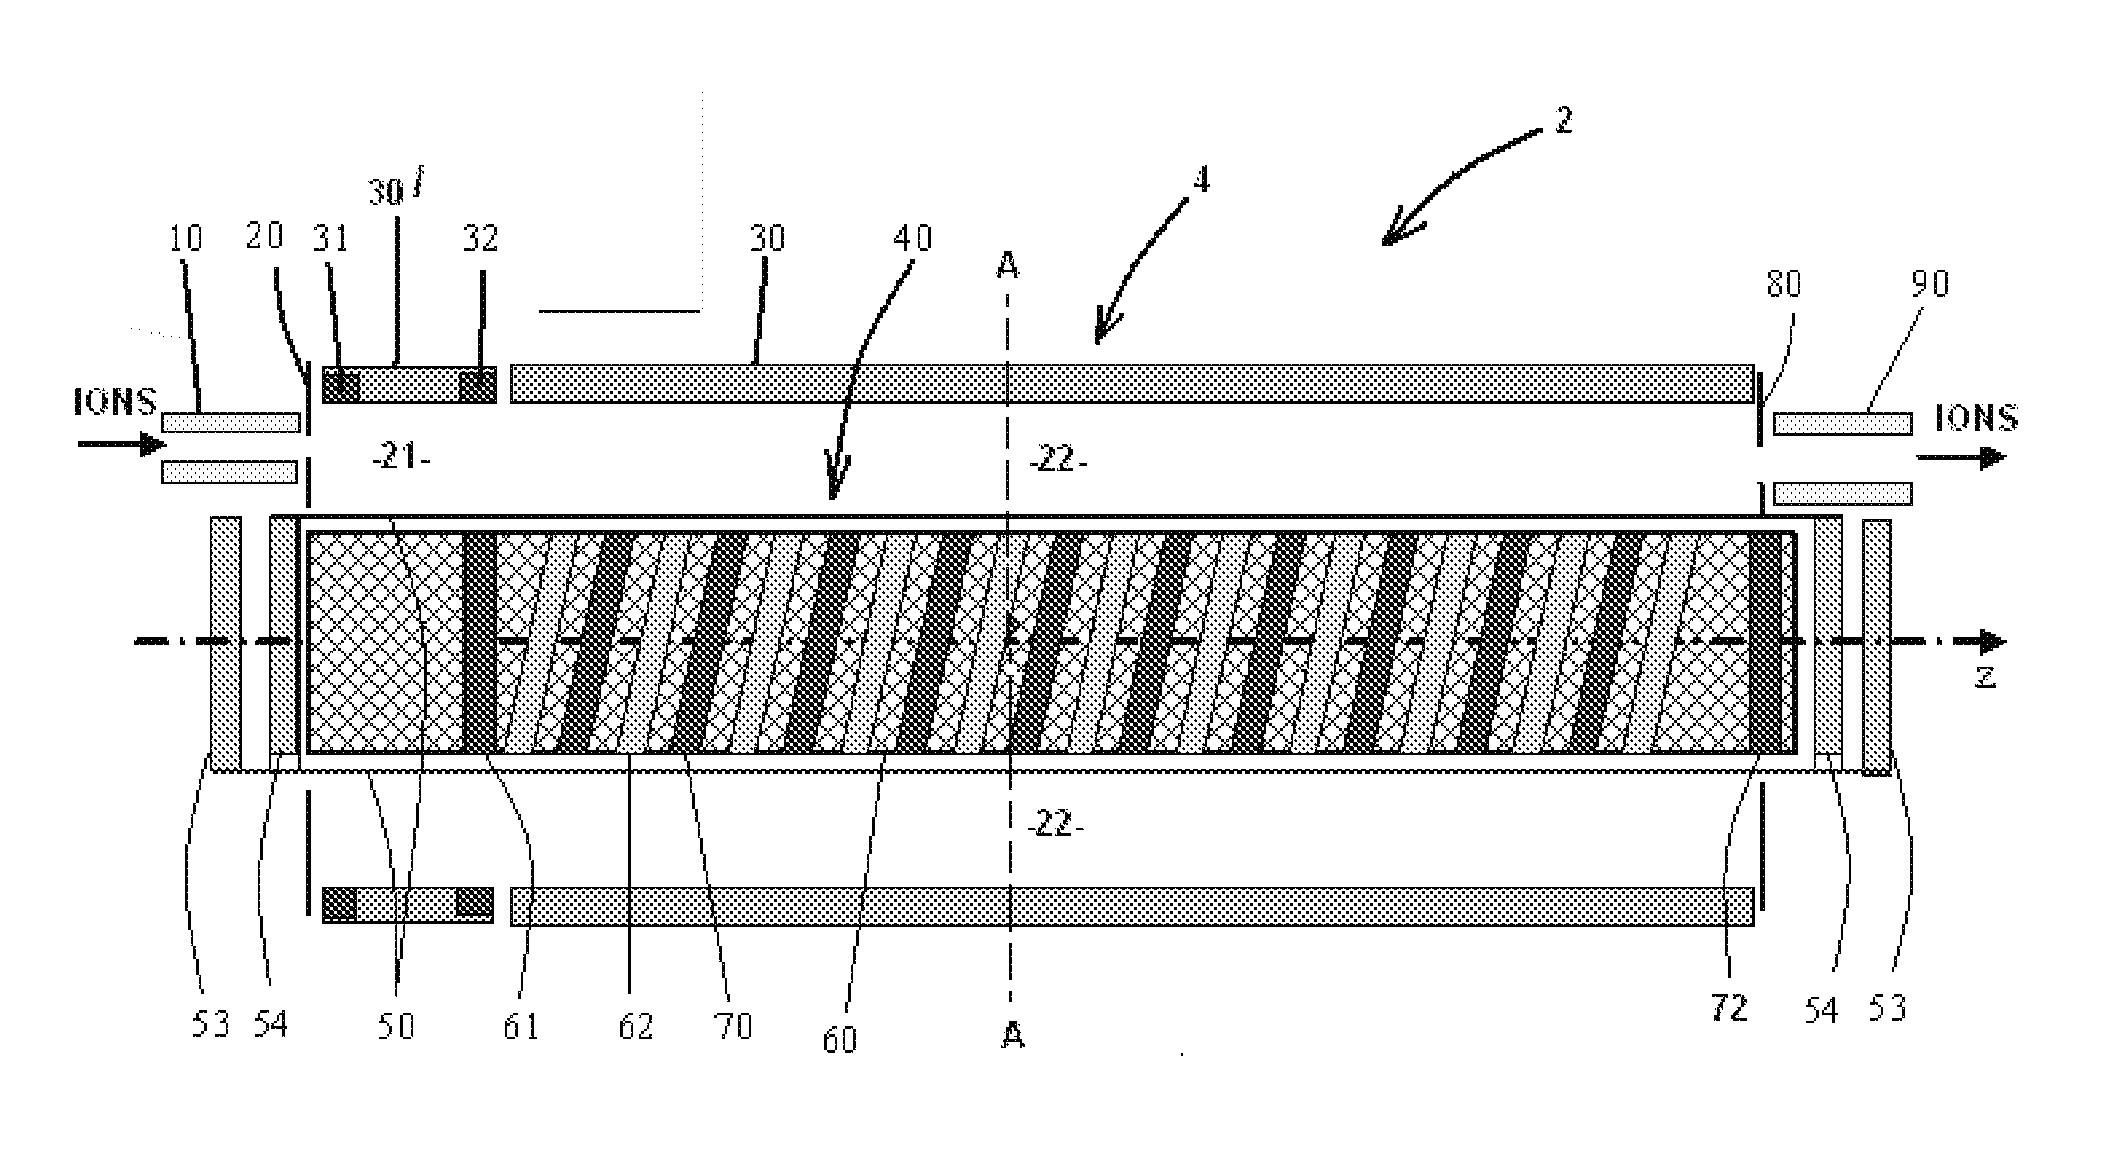 Apparatus and Methods for Ion Mobility Spectrometry